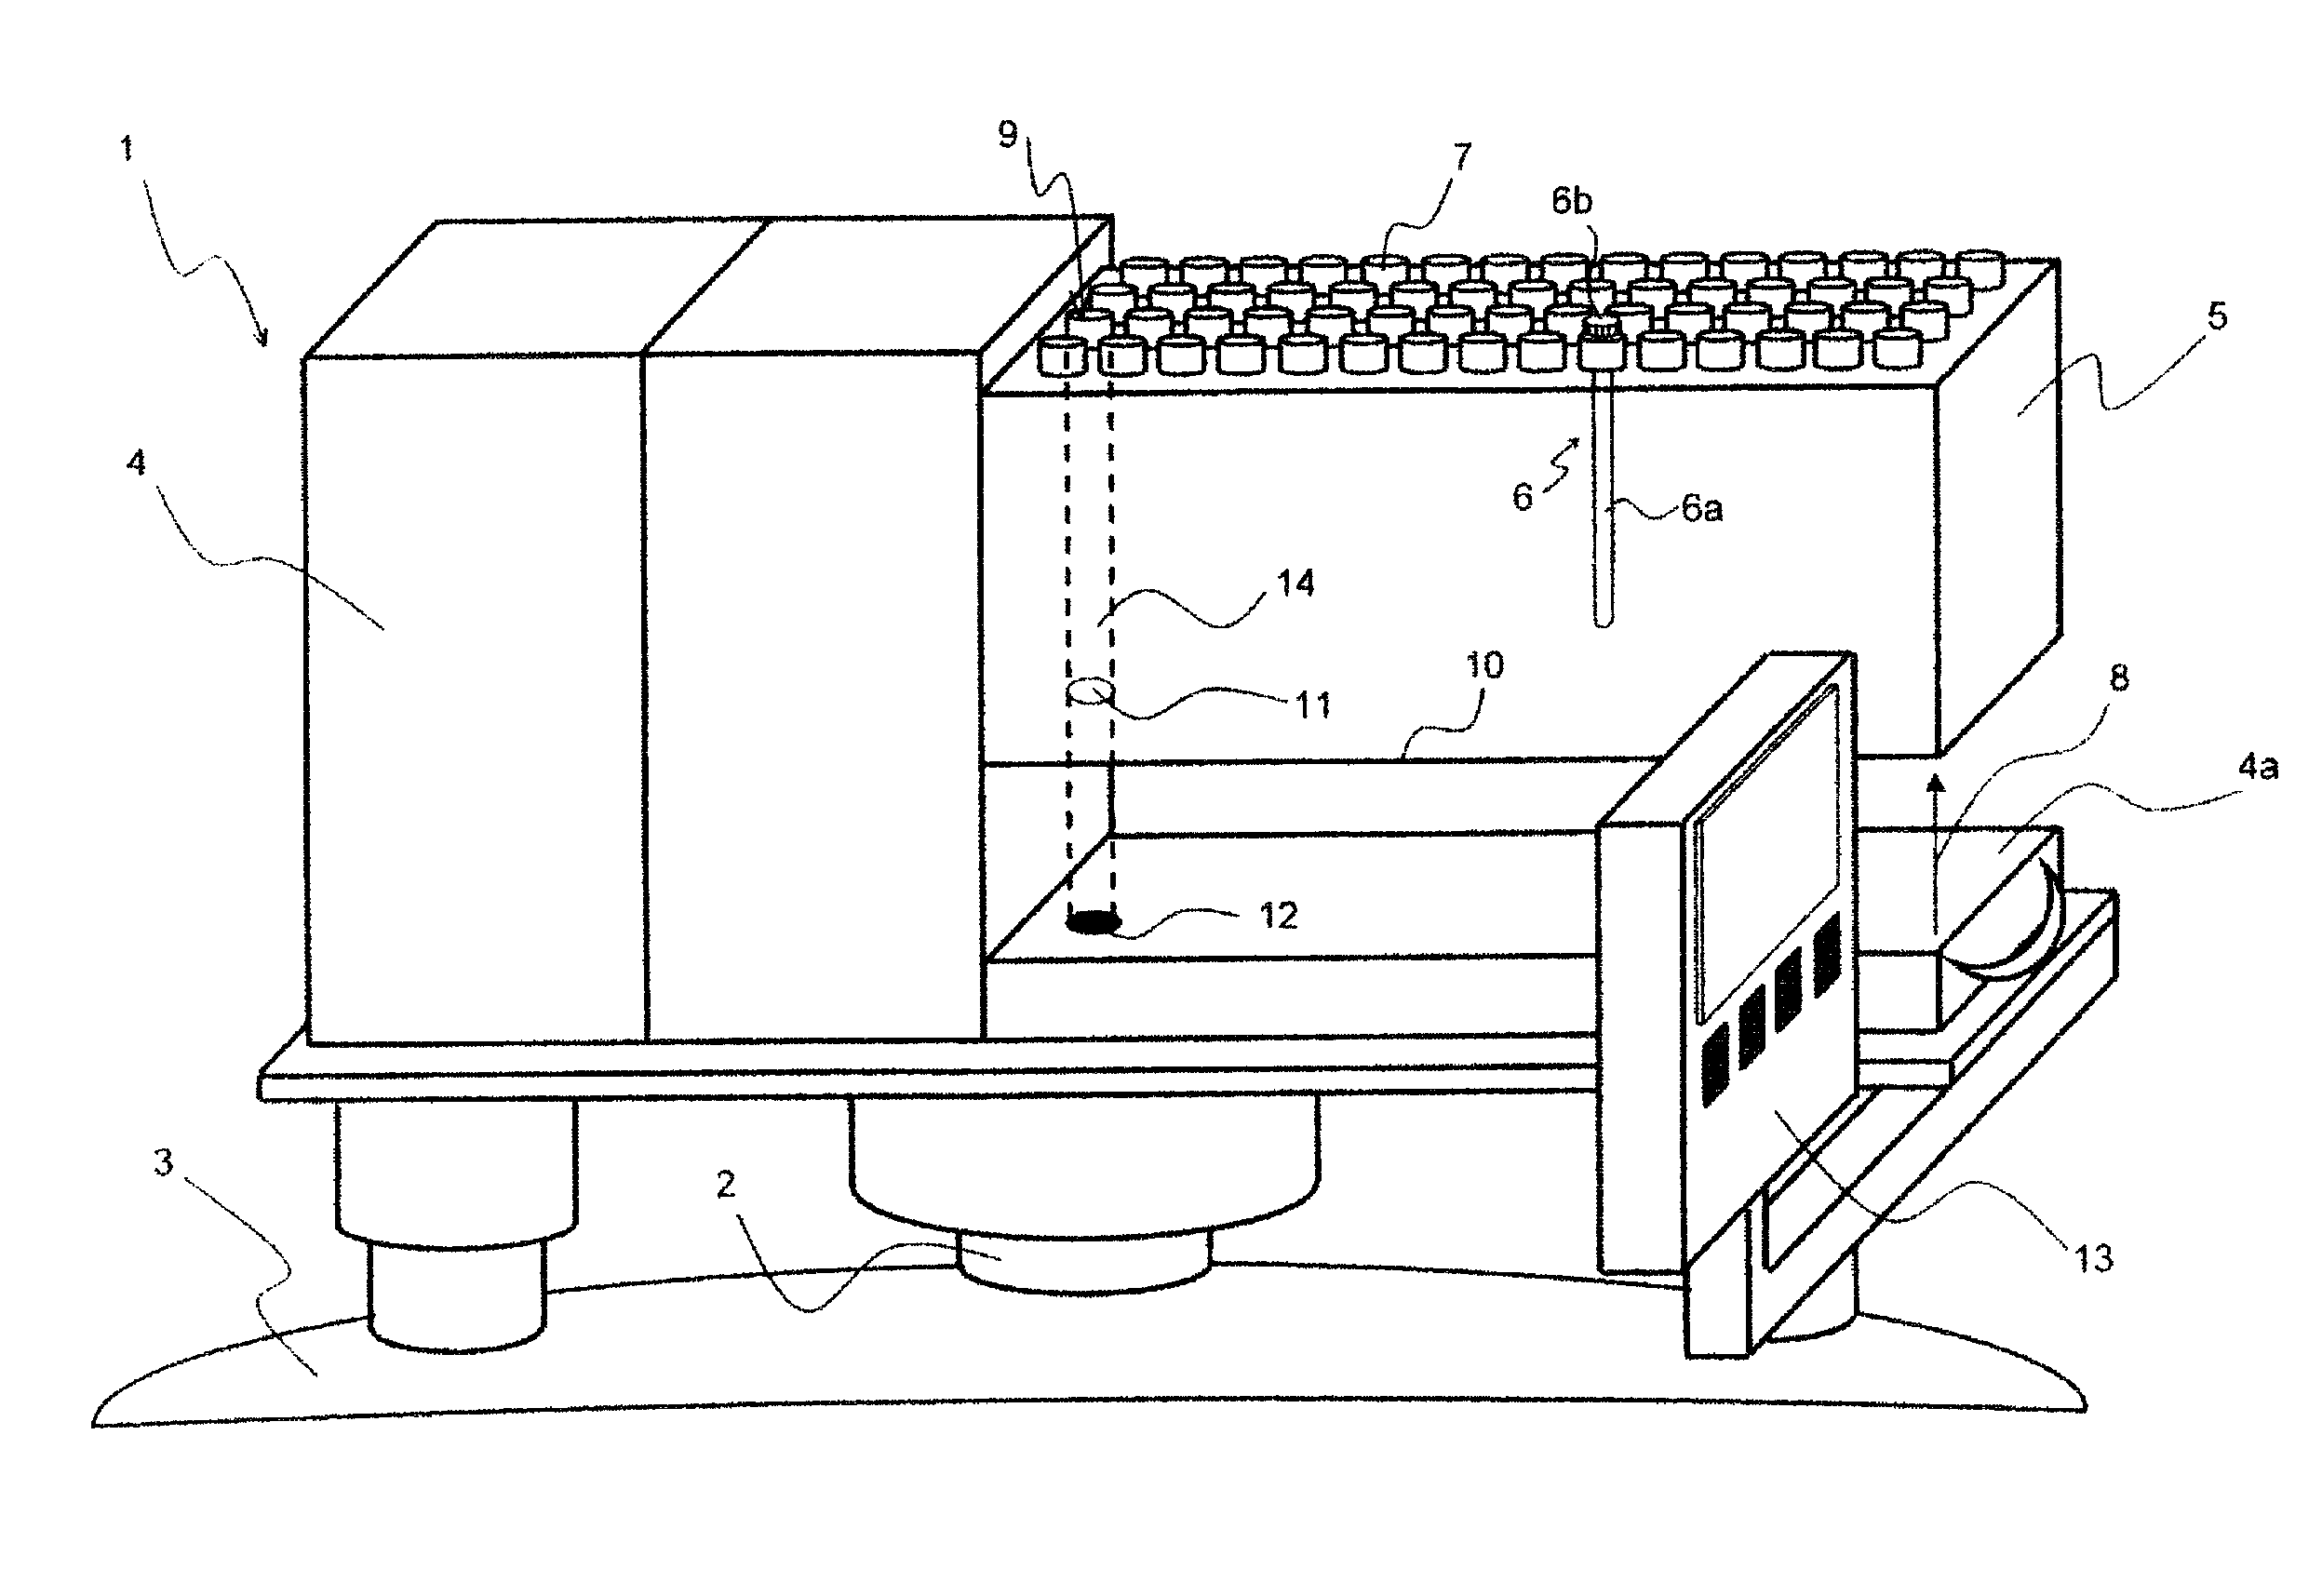 Sample exchange device having a sample receptacle guided through a meandering path, in particular for an NMR spectrometer